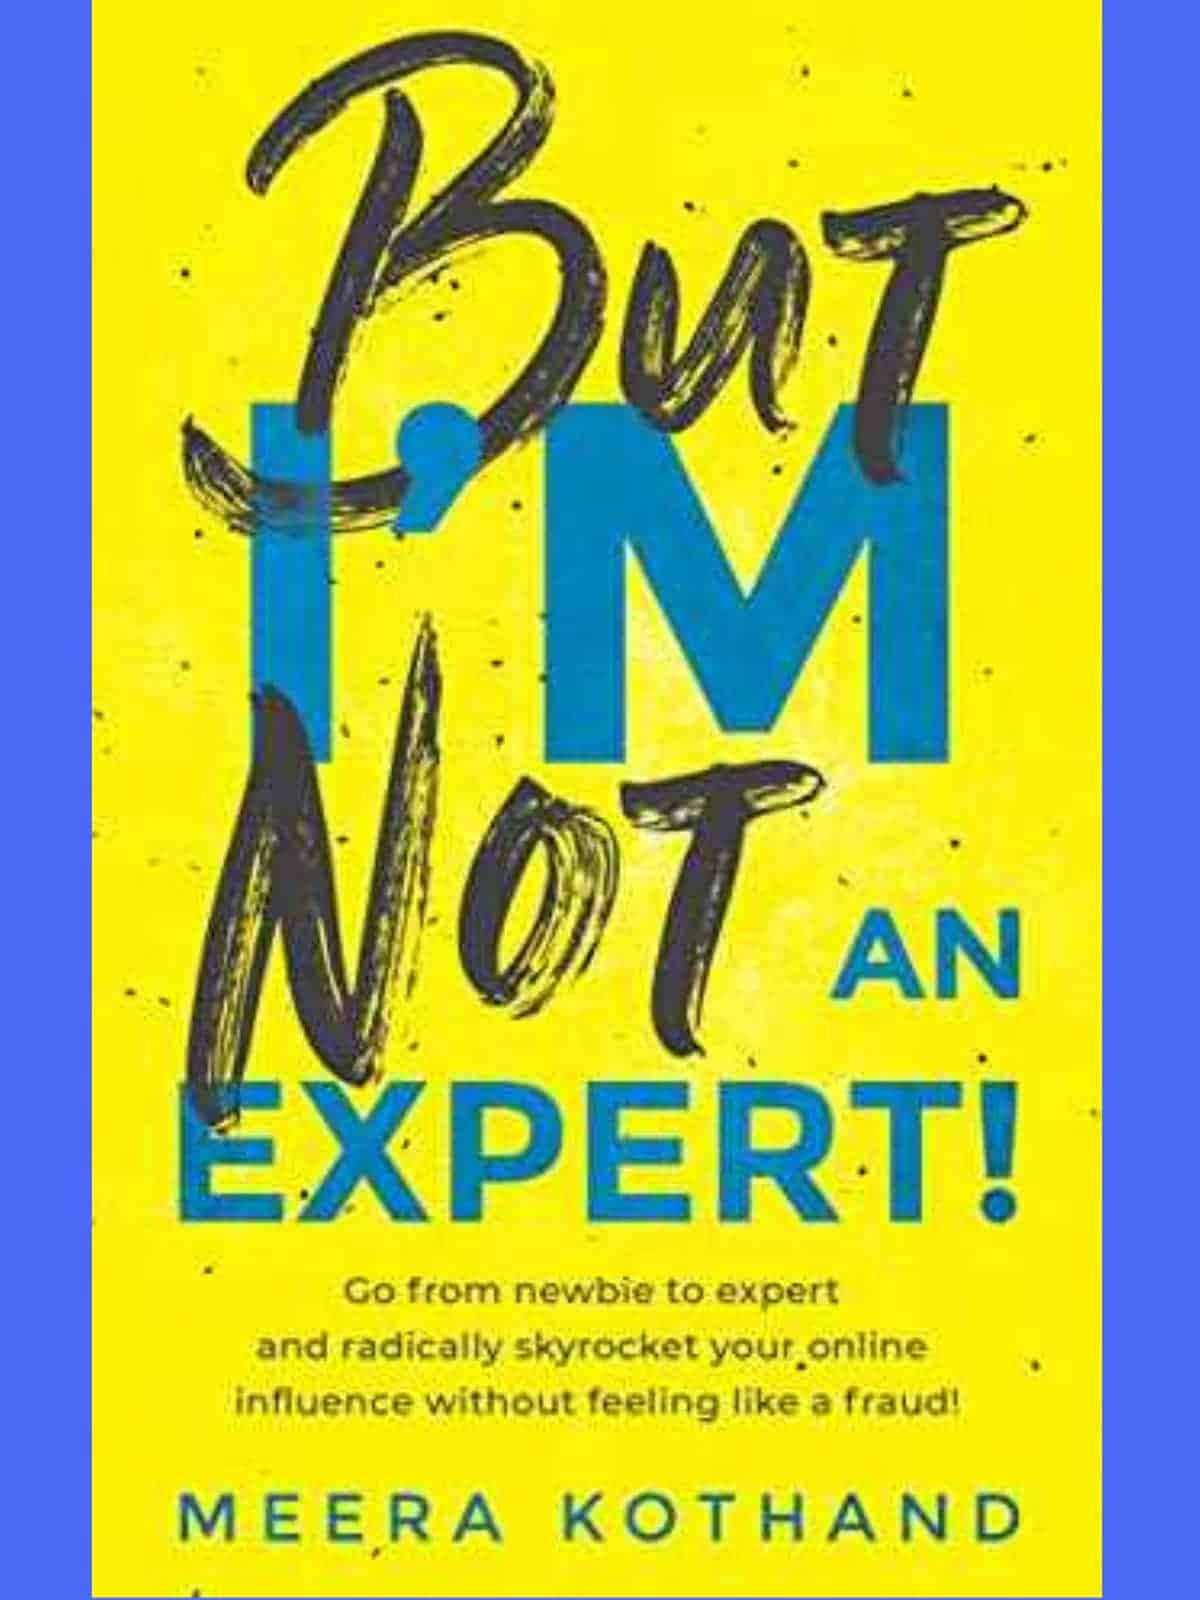 But I'm Not An Expert! by Meera Kothand ($2.99) | Amazon's Best Selling Tech Kindle eBooks